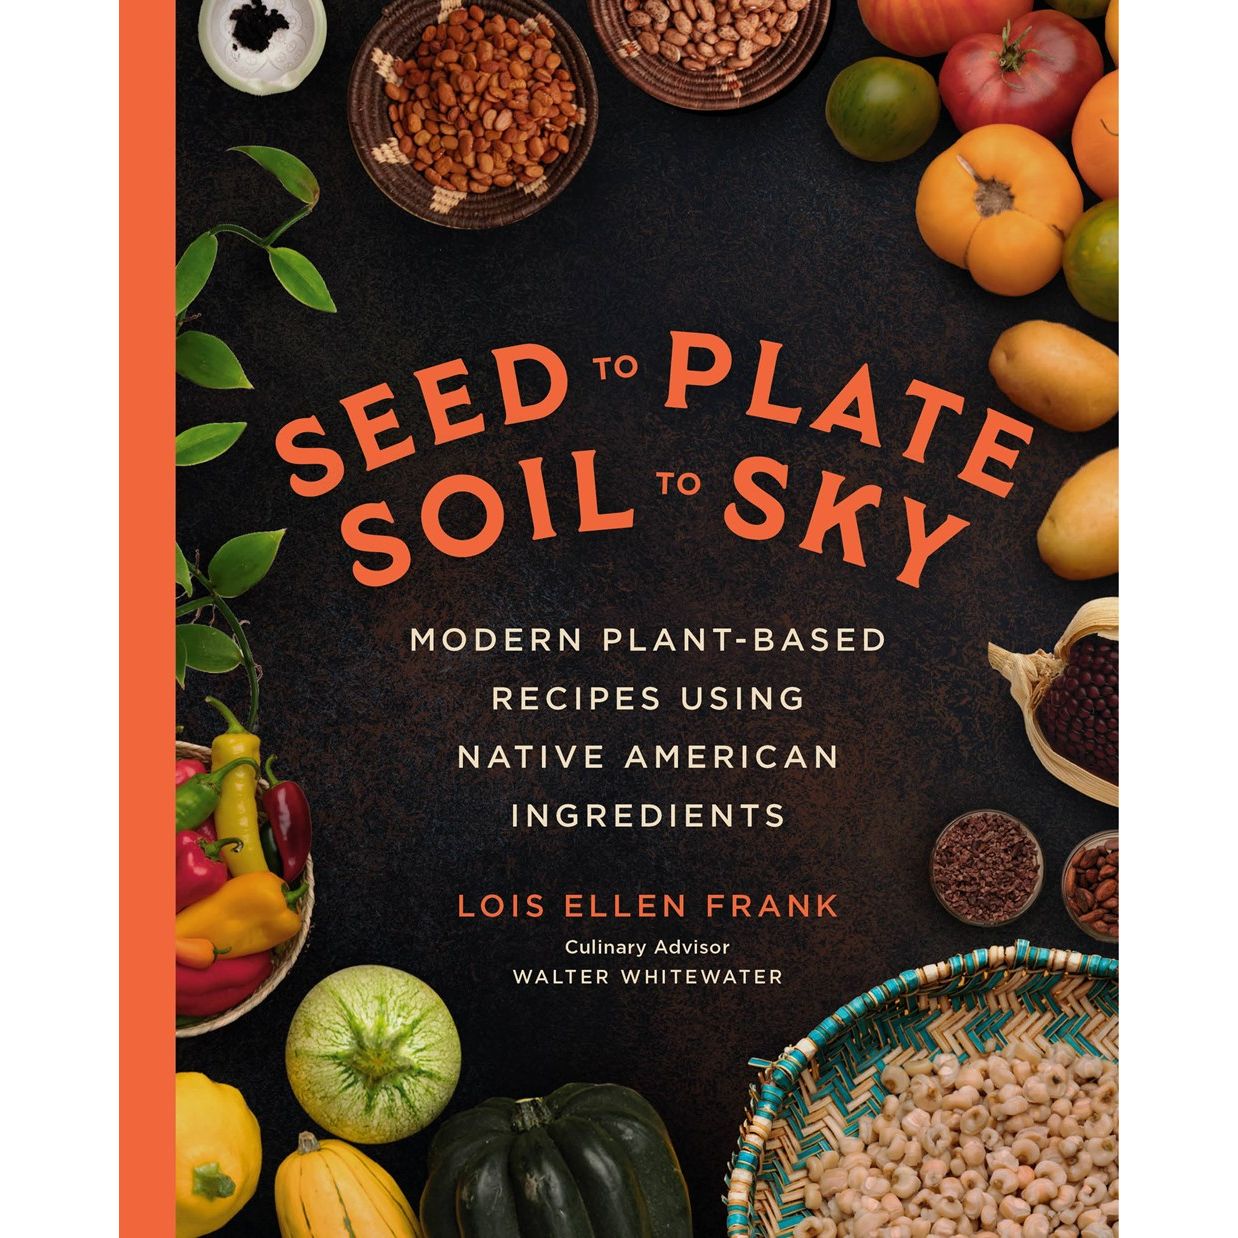 Seed to Plate, Soil to Sky : Modern Plant-Based Recipes using Native American Ingredients (Lois Ellen Frank)